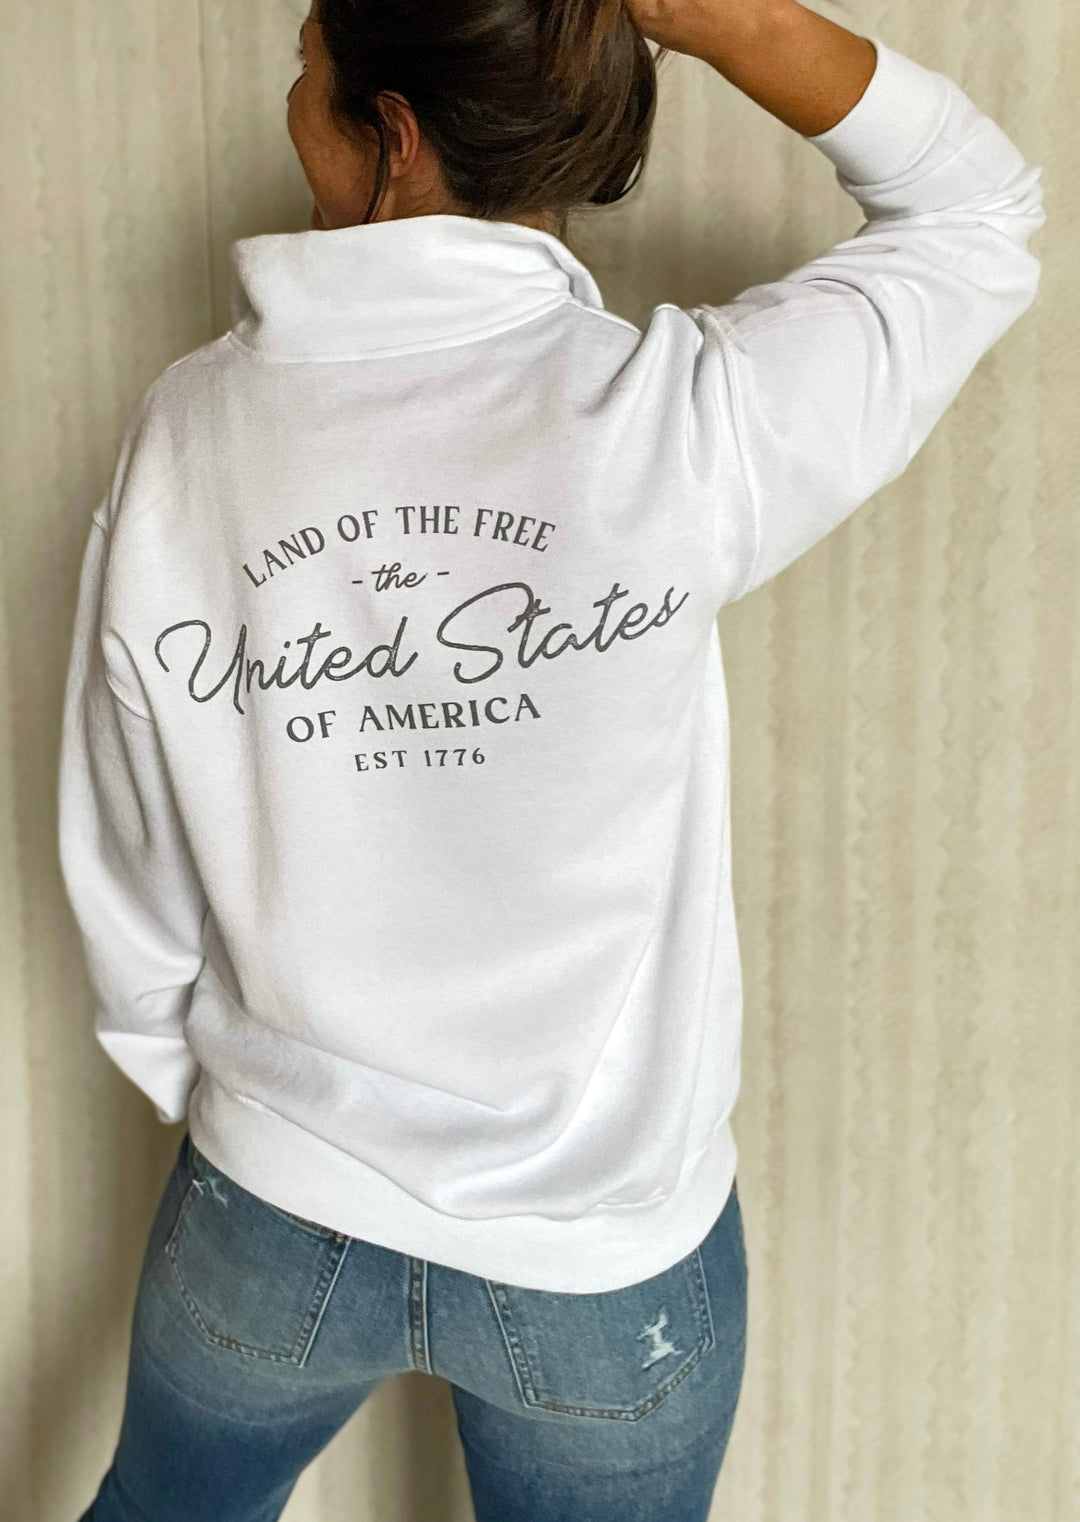 White 1/4 Mock Quarter Zip Sweatshirt with Gray American flag and "Land of the Free, United States of America, EST 1776" text. 